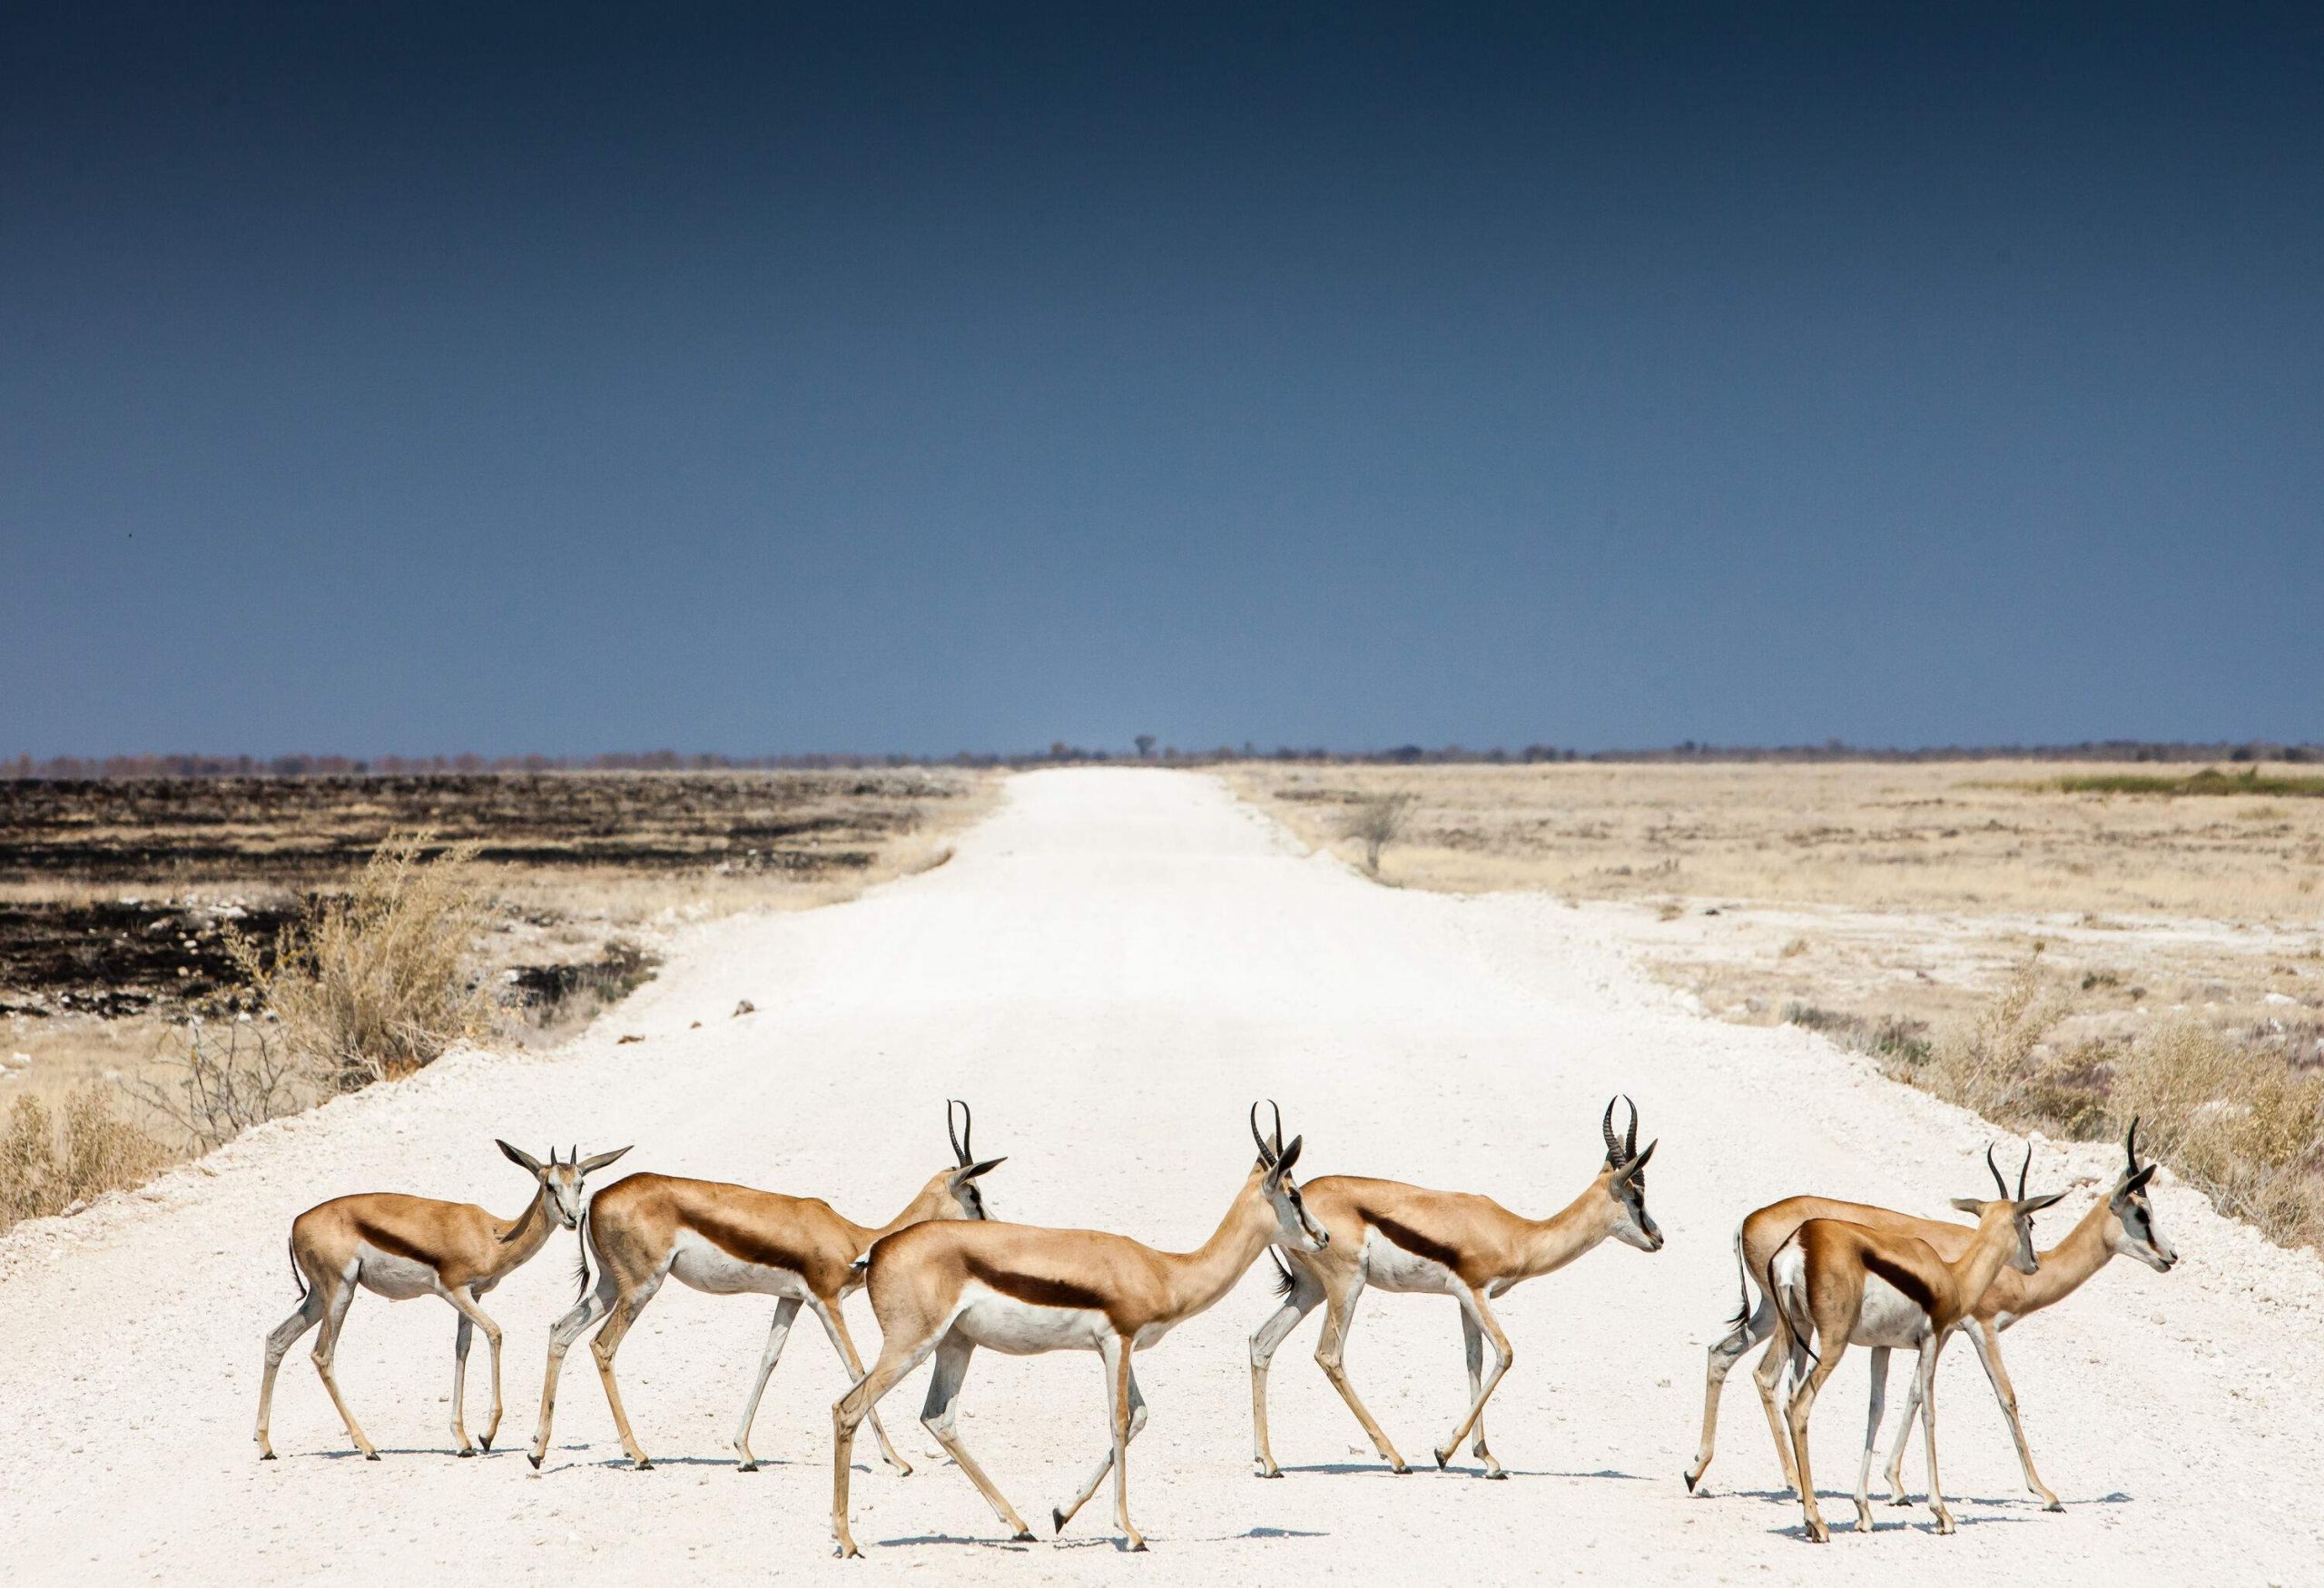 A herd of springboks crosses the long stretch of a dusty road in the middle of a vast dryland.